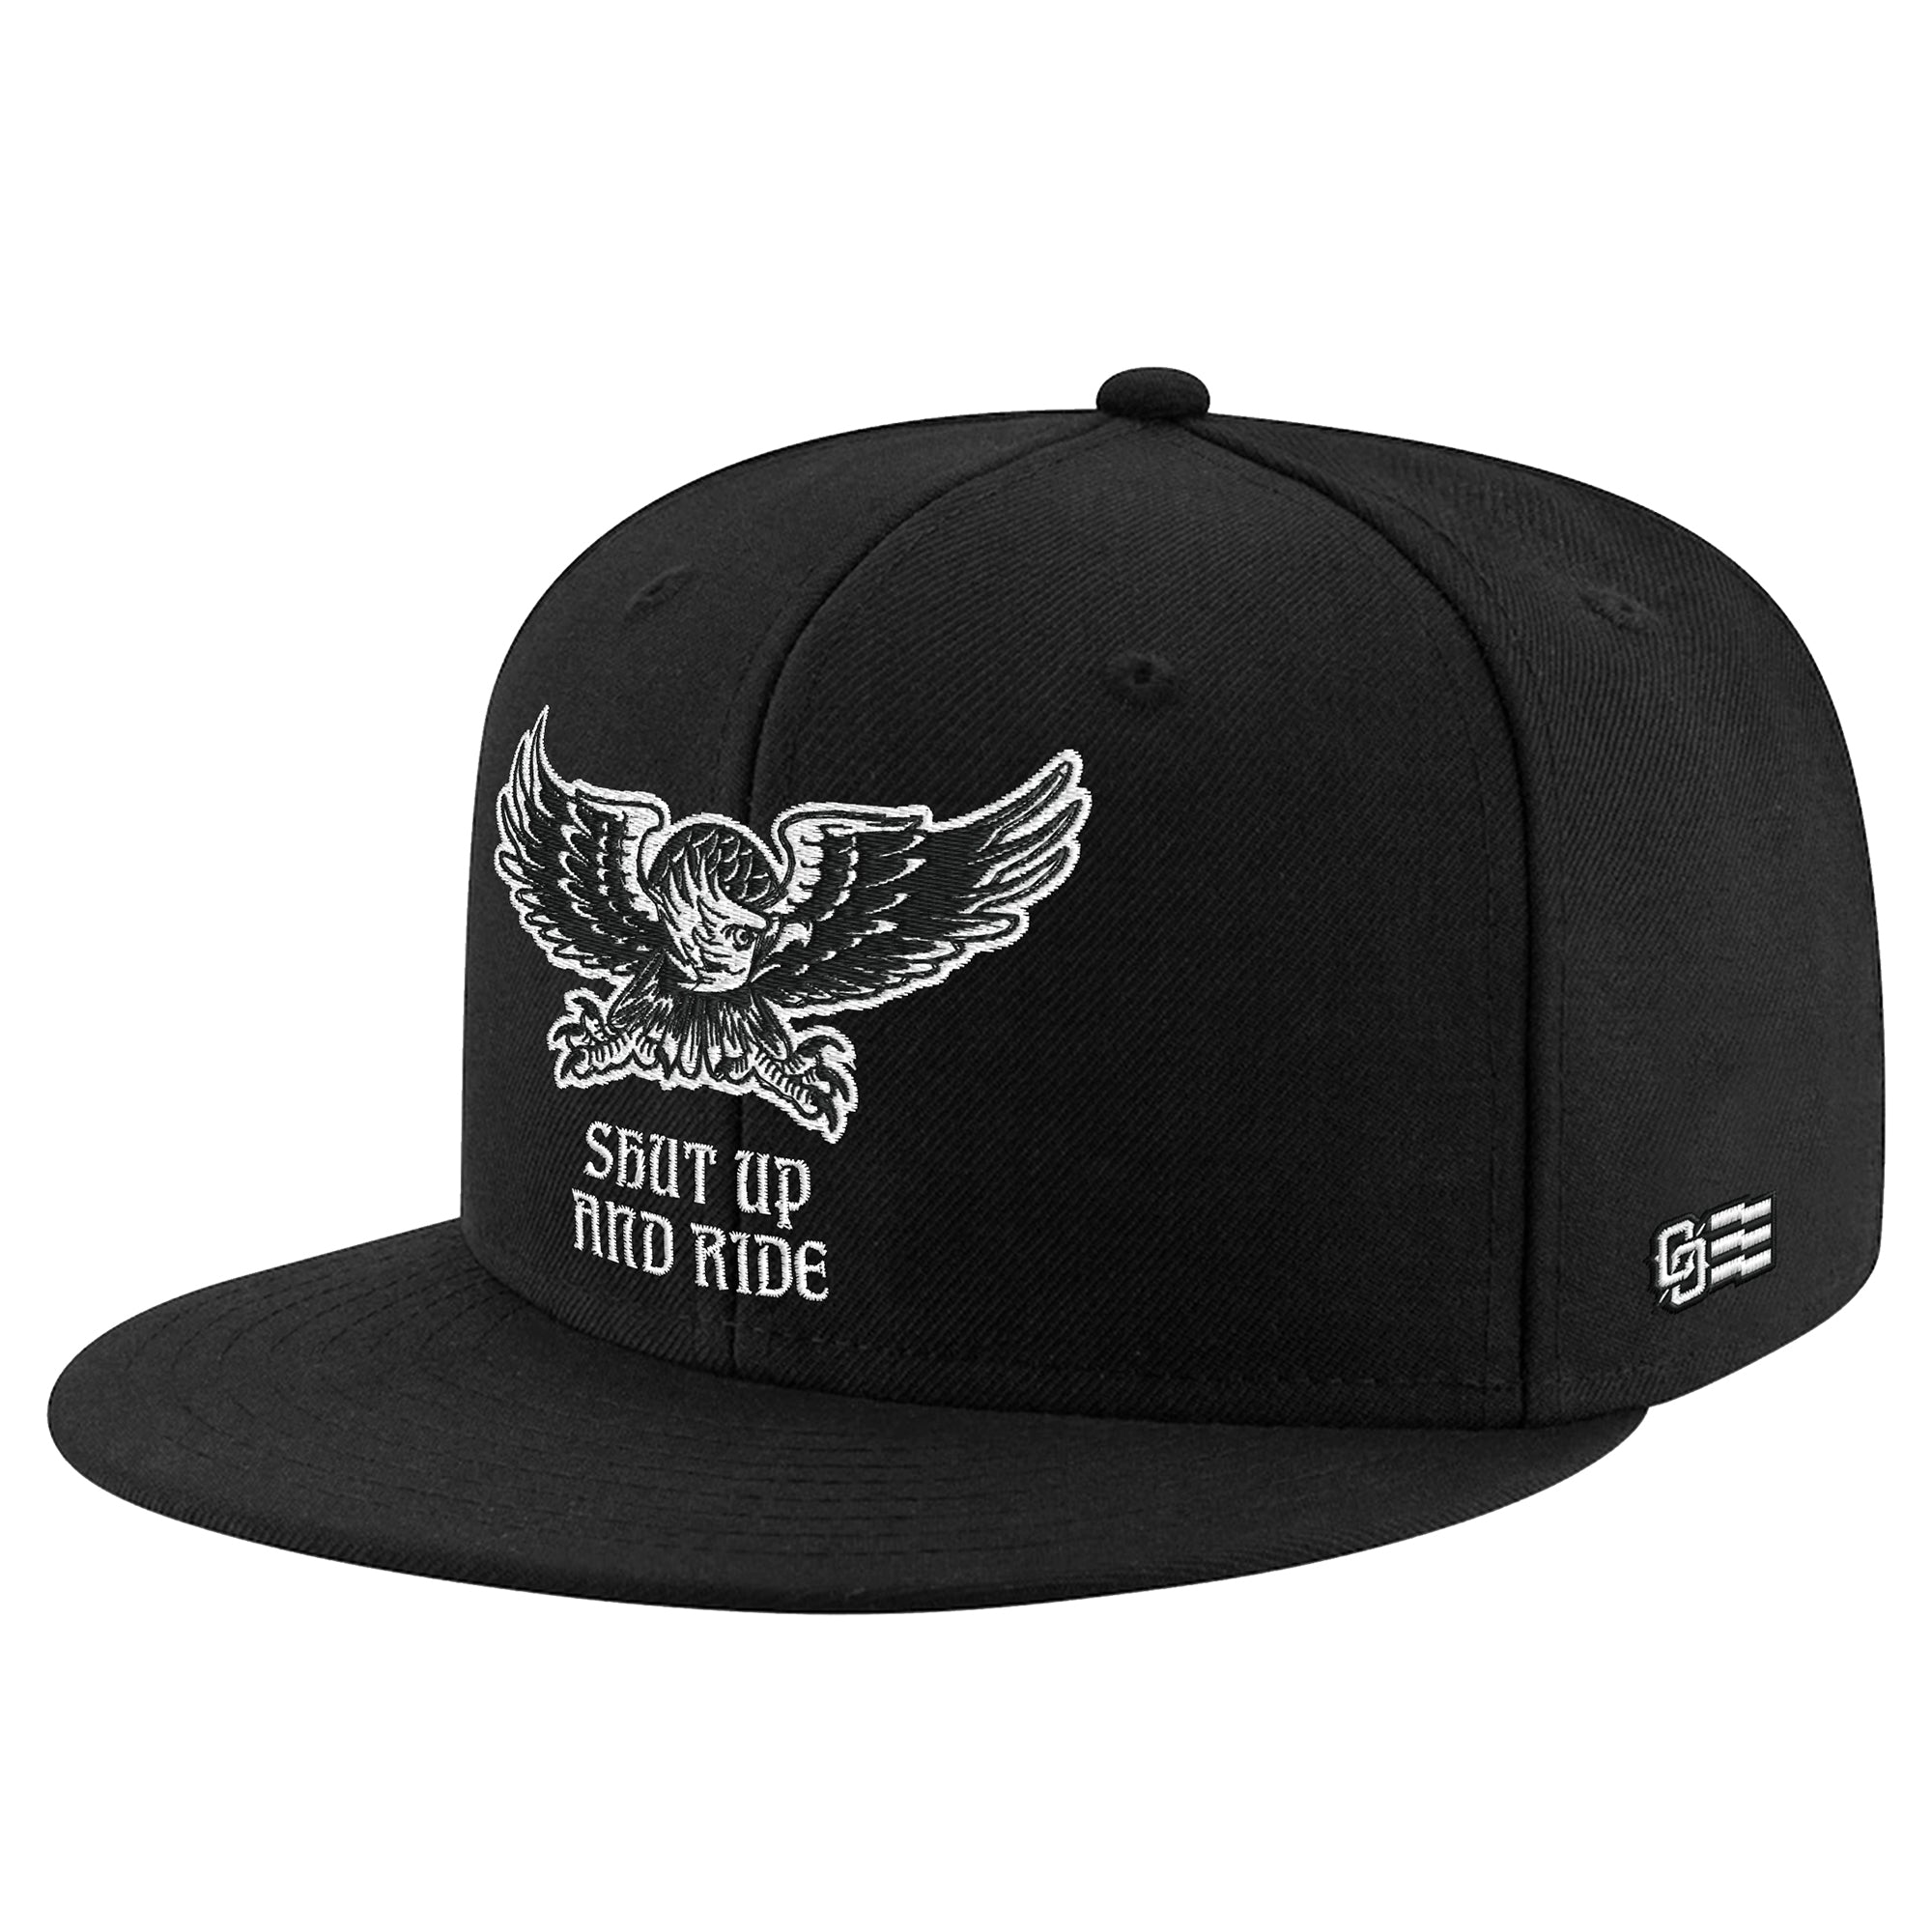 SHUT UP AND RIDE 3 HAT